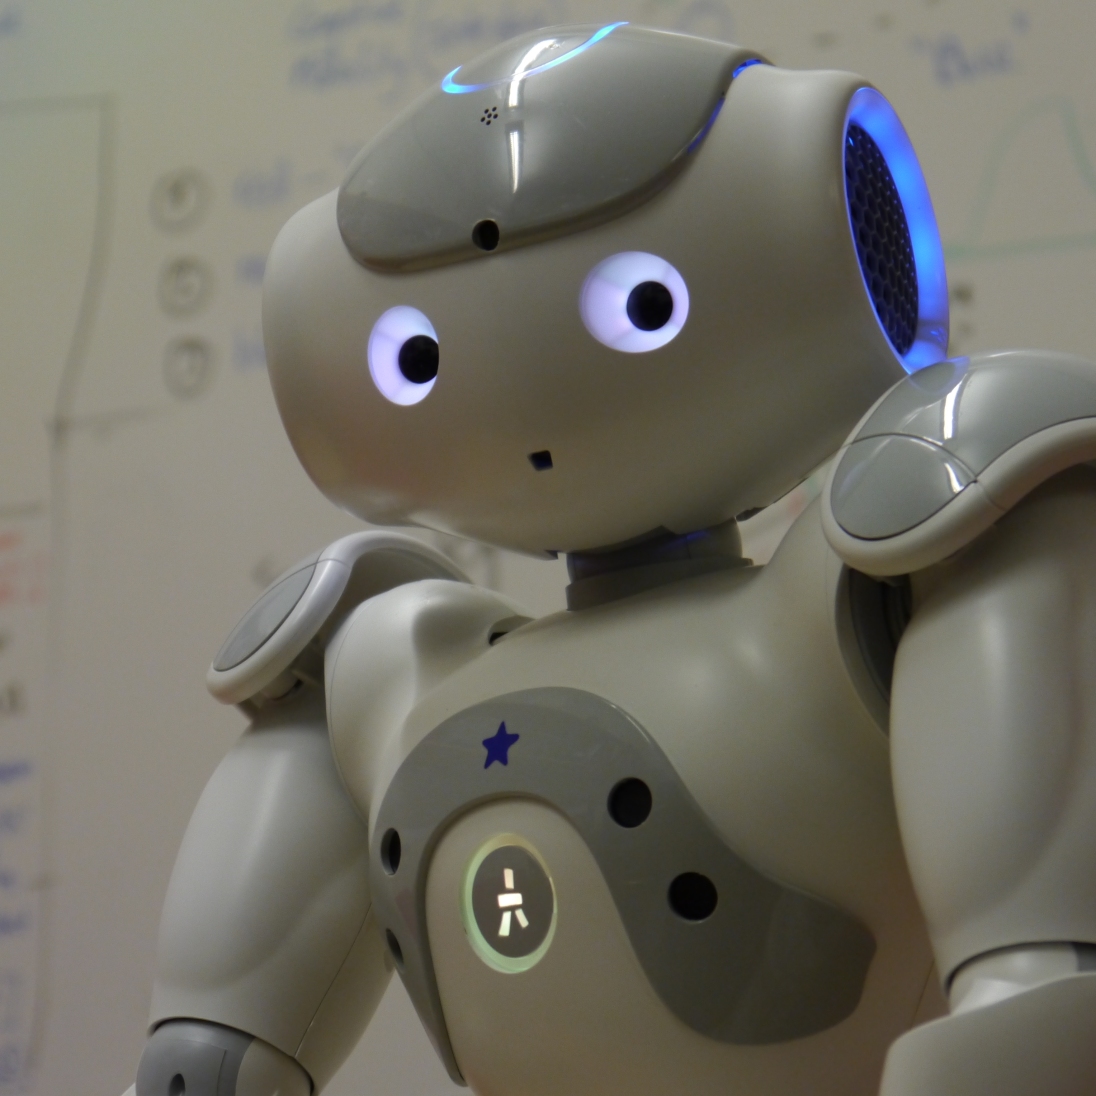 The ALIZ-E project studied how social robots could support children during a stay in hospital: the robot needed advanced AI for offering personalised interaction.